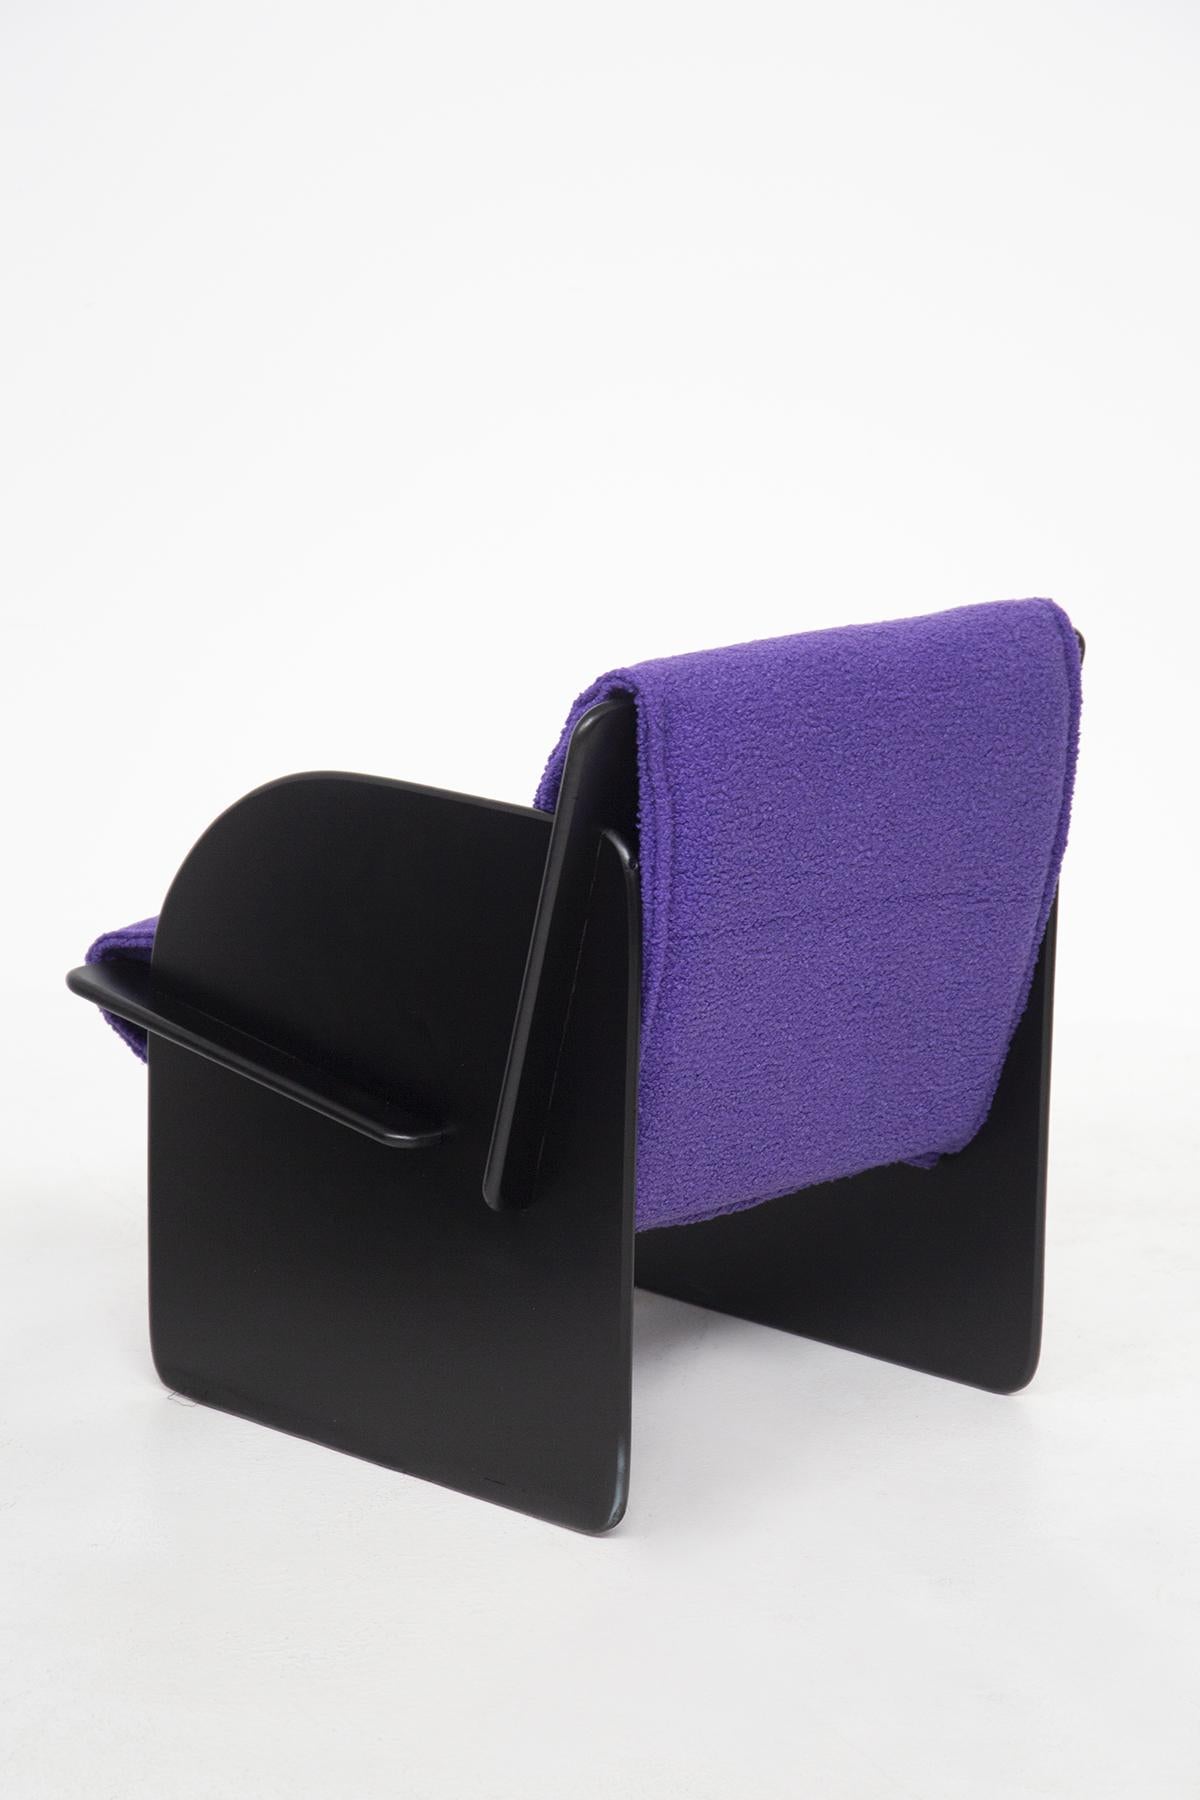 Pair of black Italian armchairs with purple bouclé from the 1960s. The pair of armchairs are of Italian manufacture and made of black painted wood. The pair of armchairs have recently been reupholstered in purple bouclé fabric. The particularity of